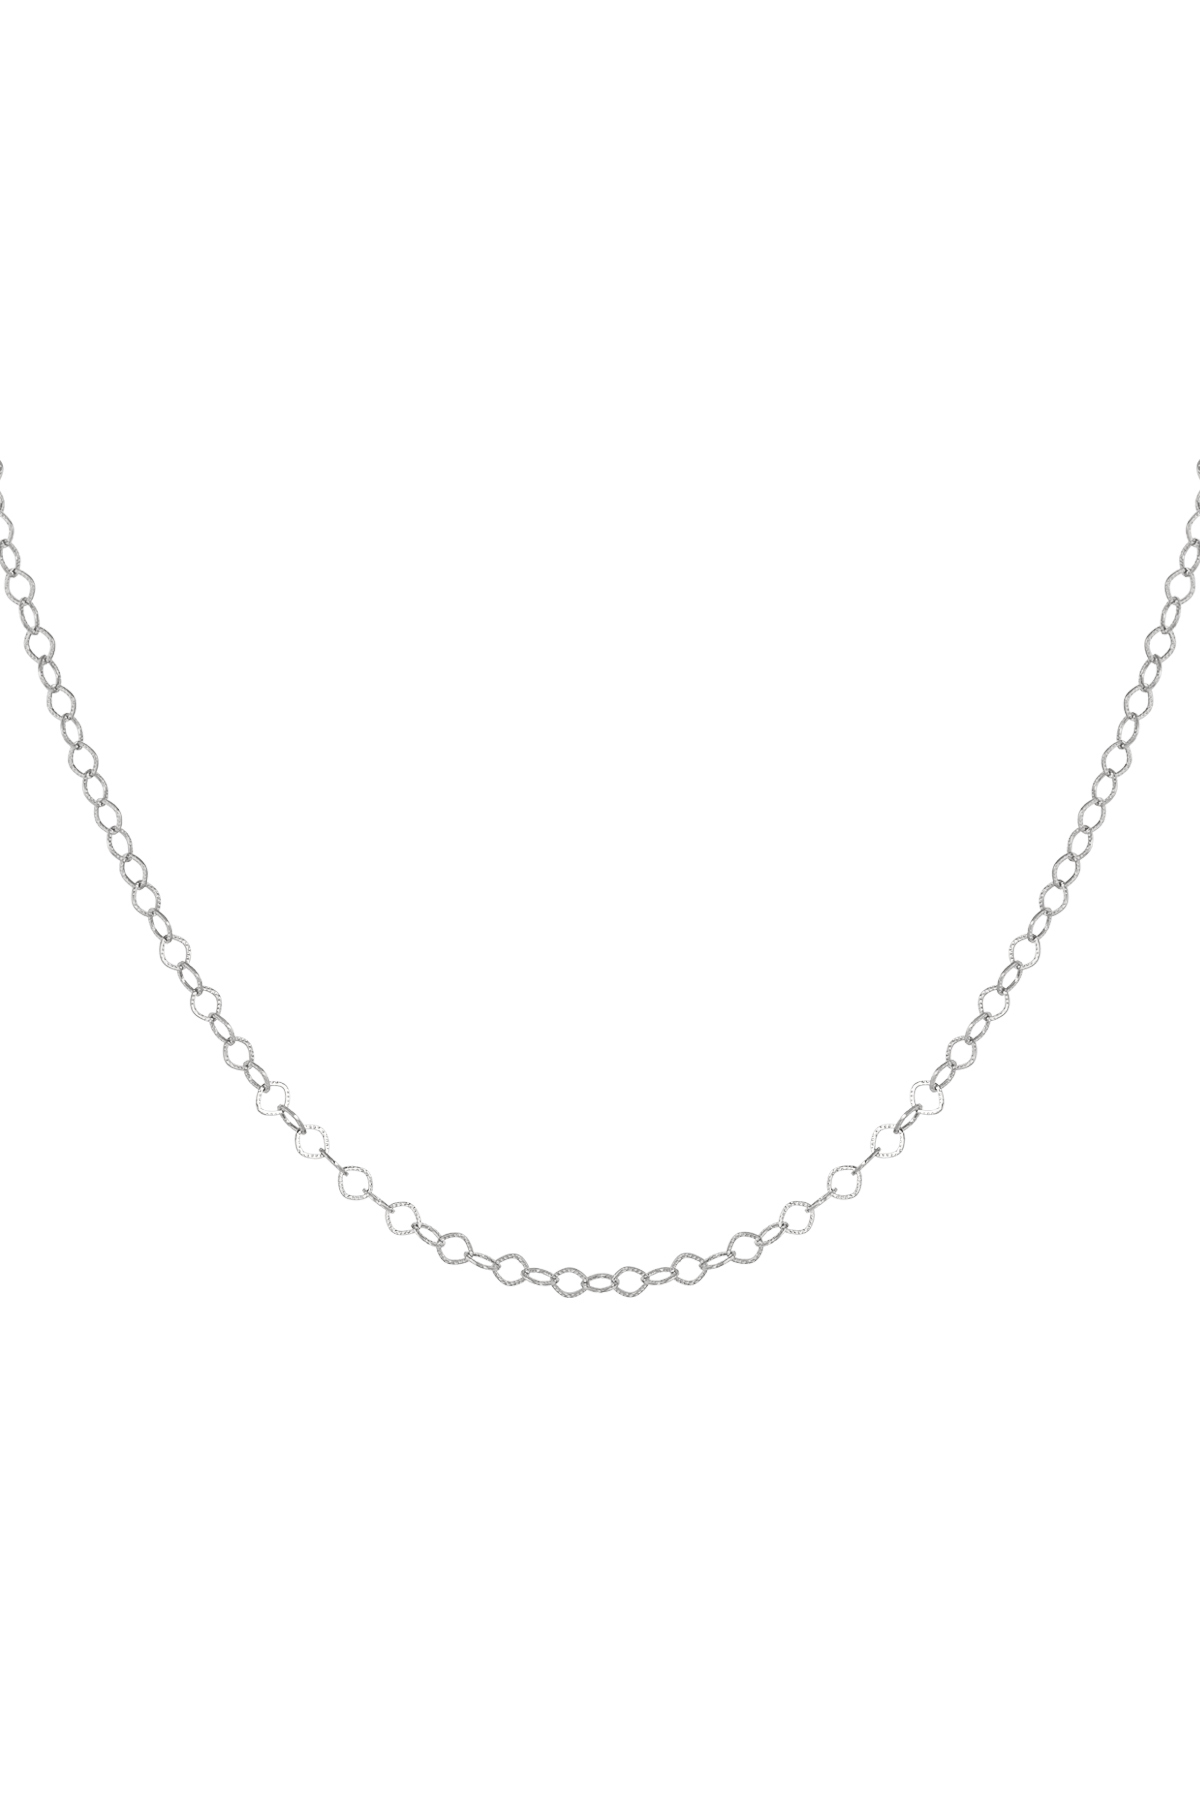 Link chain round links - silver h5 